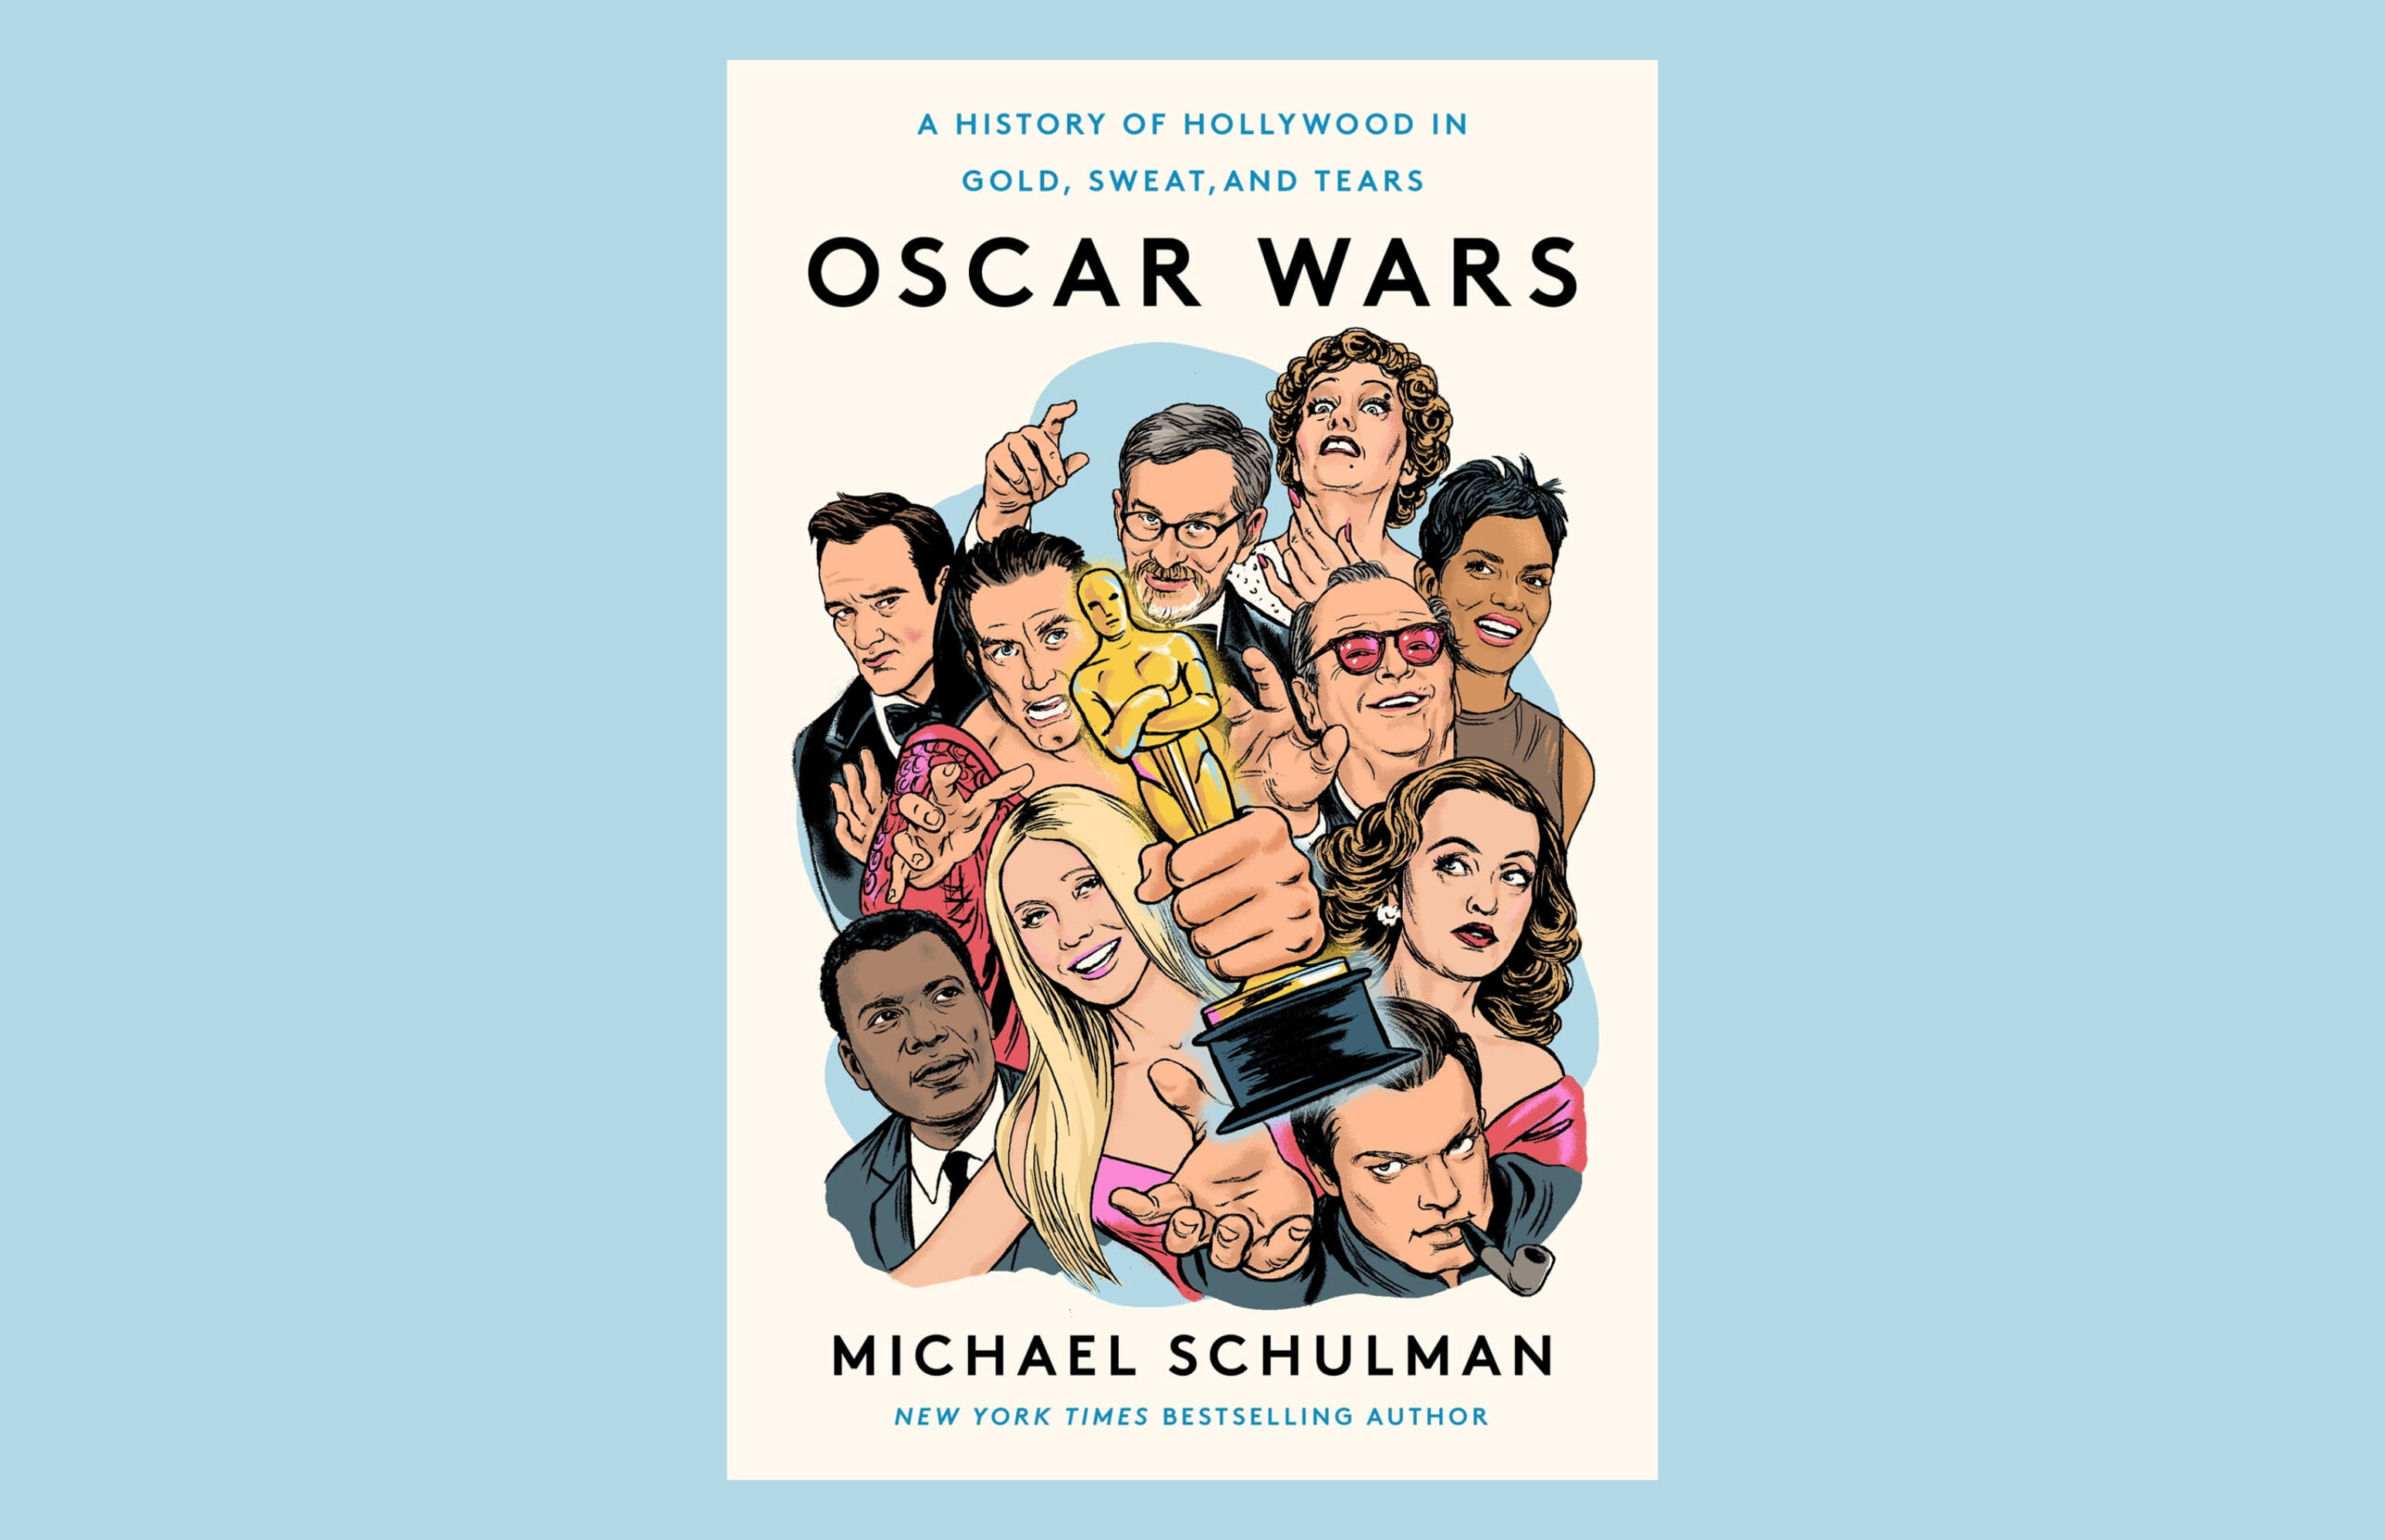 Oscar Wars: A History of Hollywood in Gold, Sweat, and Tears by Michael Schulman